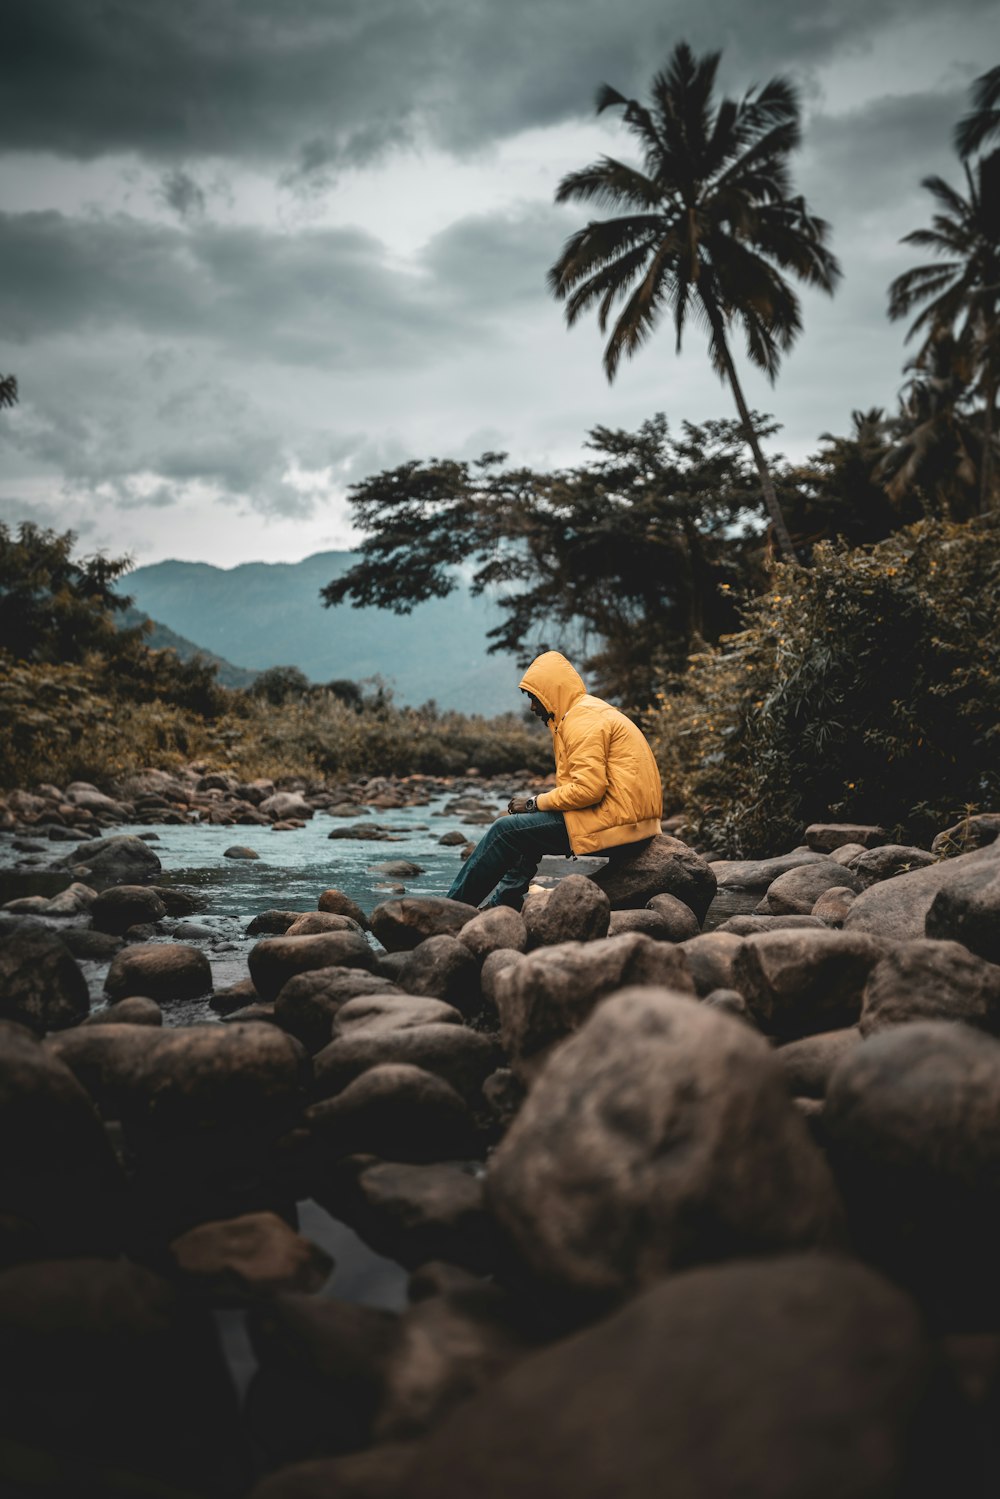 a person sitting on rocks near a river